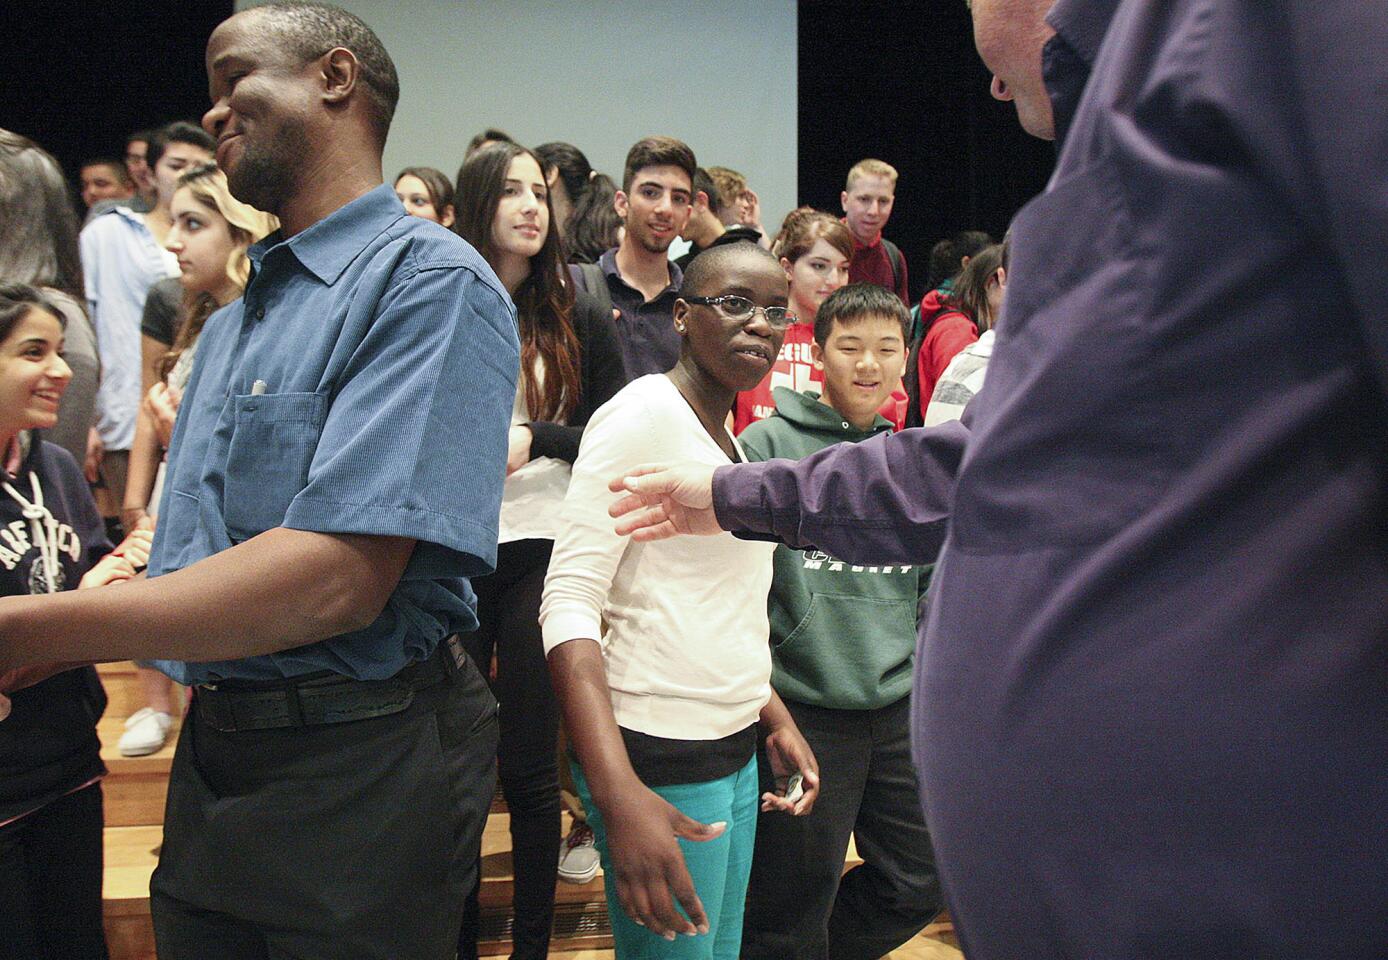 Phiona Mutesi, center, is the center of attention for students and adminstration to be photographed with at Clark Magnet High School in Glendale on Monday, April 28, 2014. Mutesi grew up in the slums of Uganda and through the game of chess has lifted herself out of the slums onto the international stage for chess and to raise awareness about the plight of her Ugandan people. After her presentation for the students of Clark Magnet, she played against local chess grandmaster Tatev Abrahamyan, of Glendale.